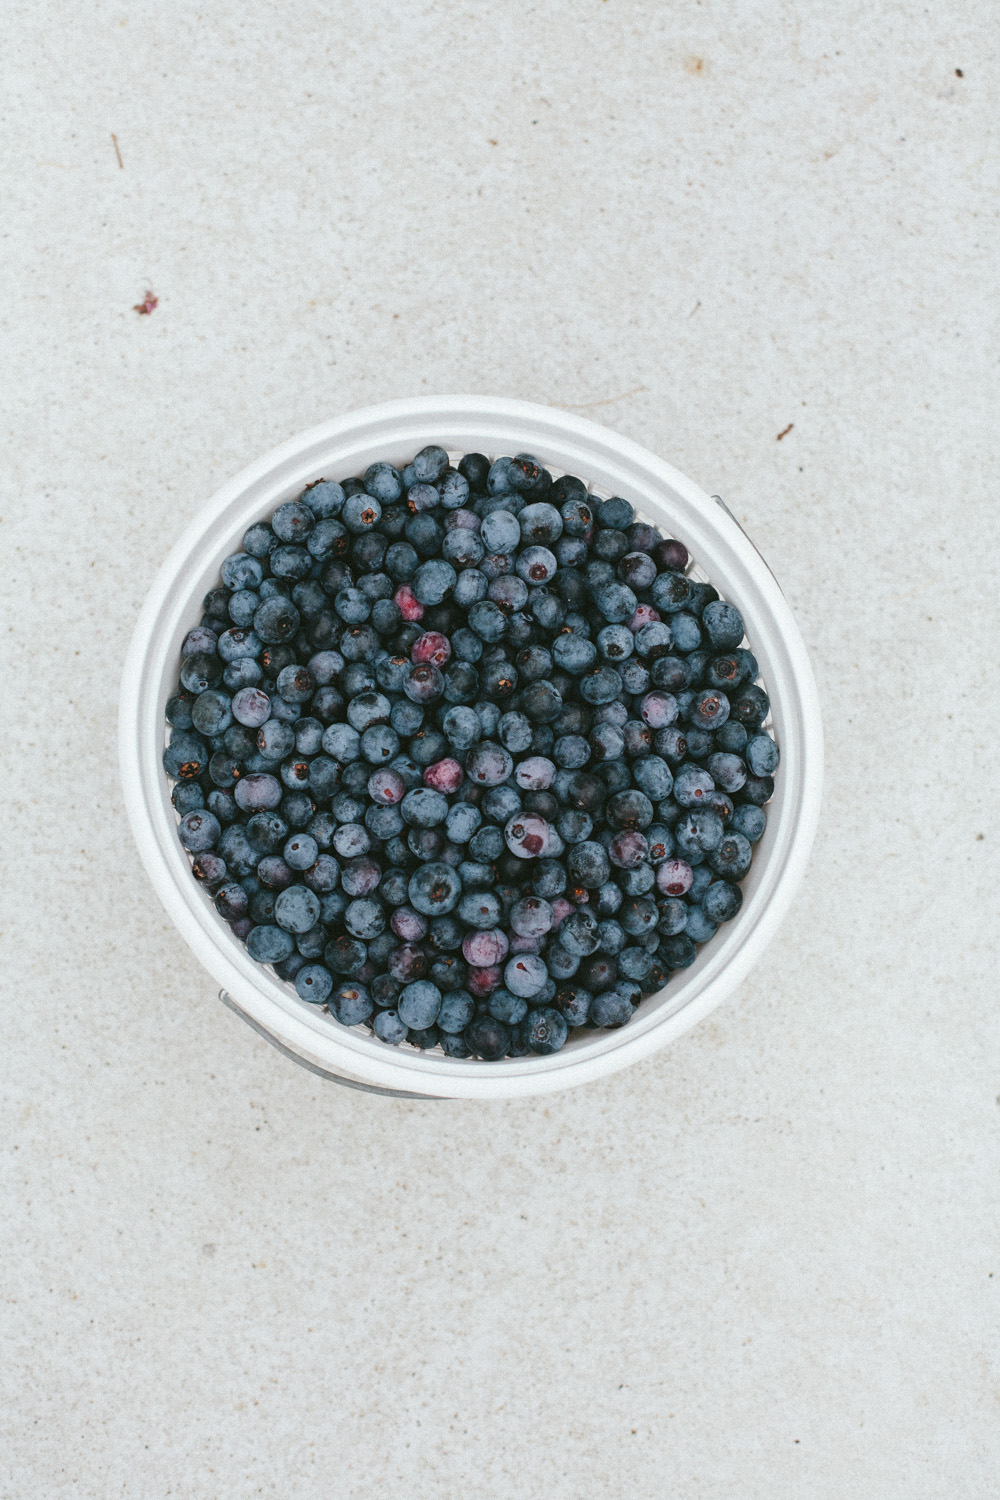 easy blueberry recipes to try